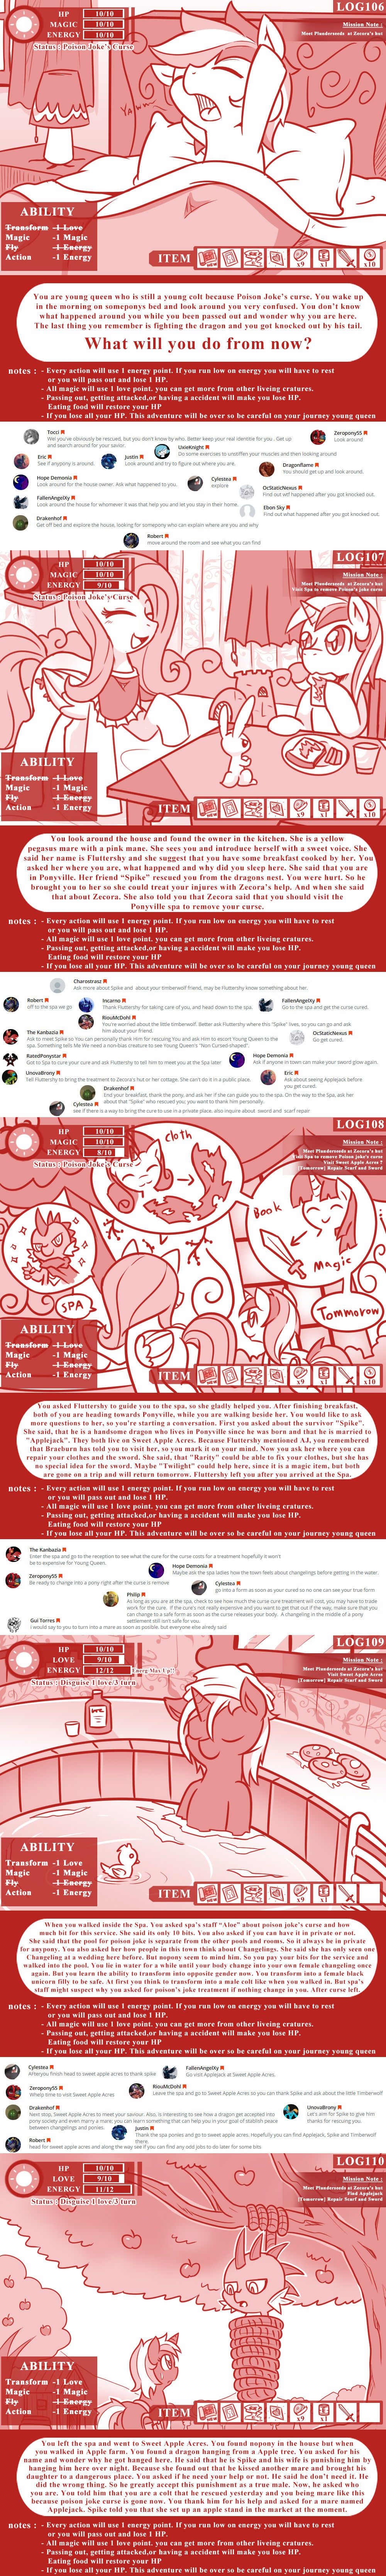 [Vavacung] The Adventure Logs Of Young Queen (My Little Pony Friendship is Magic) [Updated] [Ongoing] 24